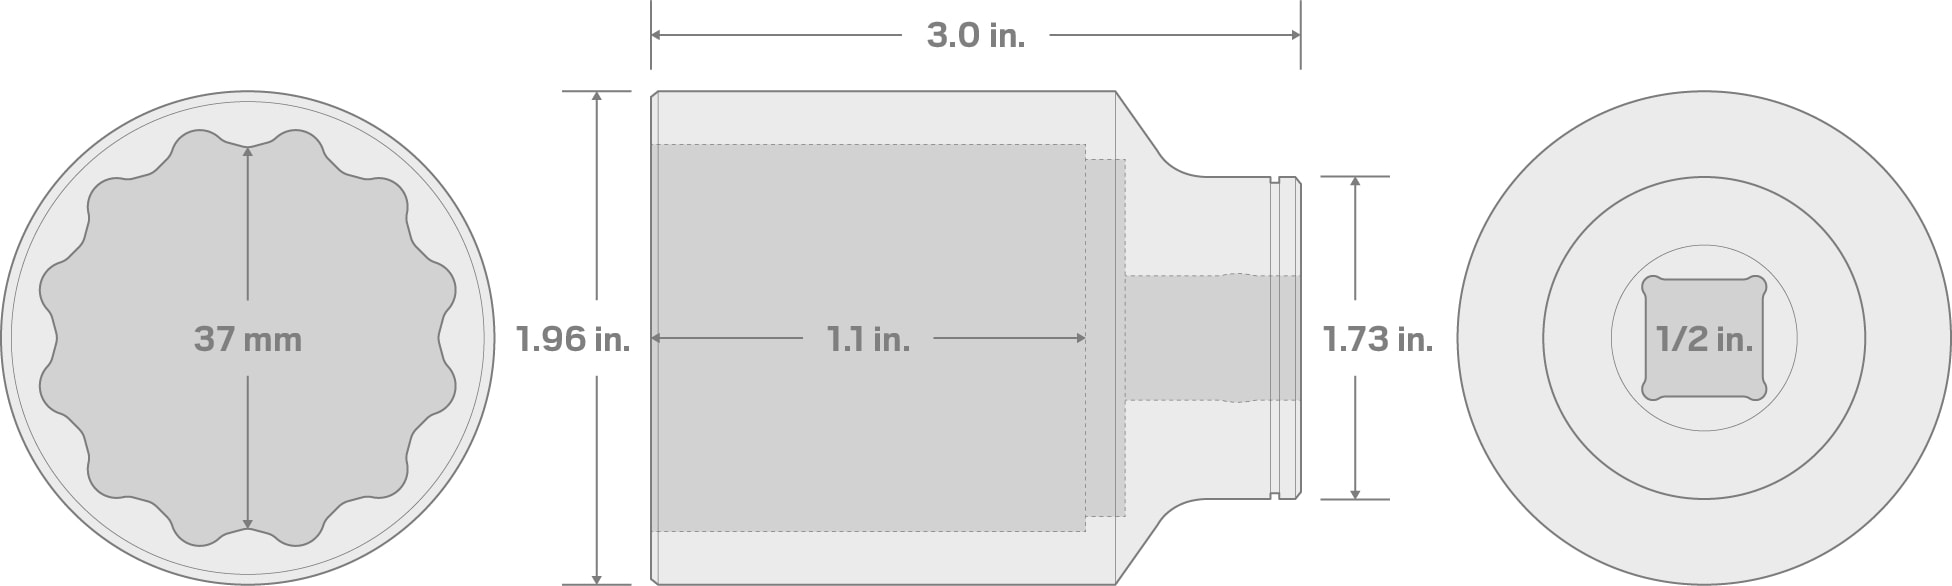 Specs for 1/2 Inch Drive x 37 mm Deep 12-Point Socket